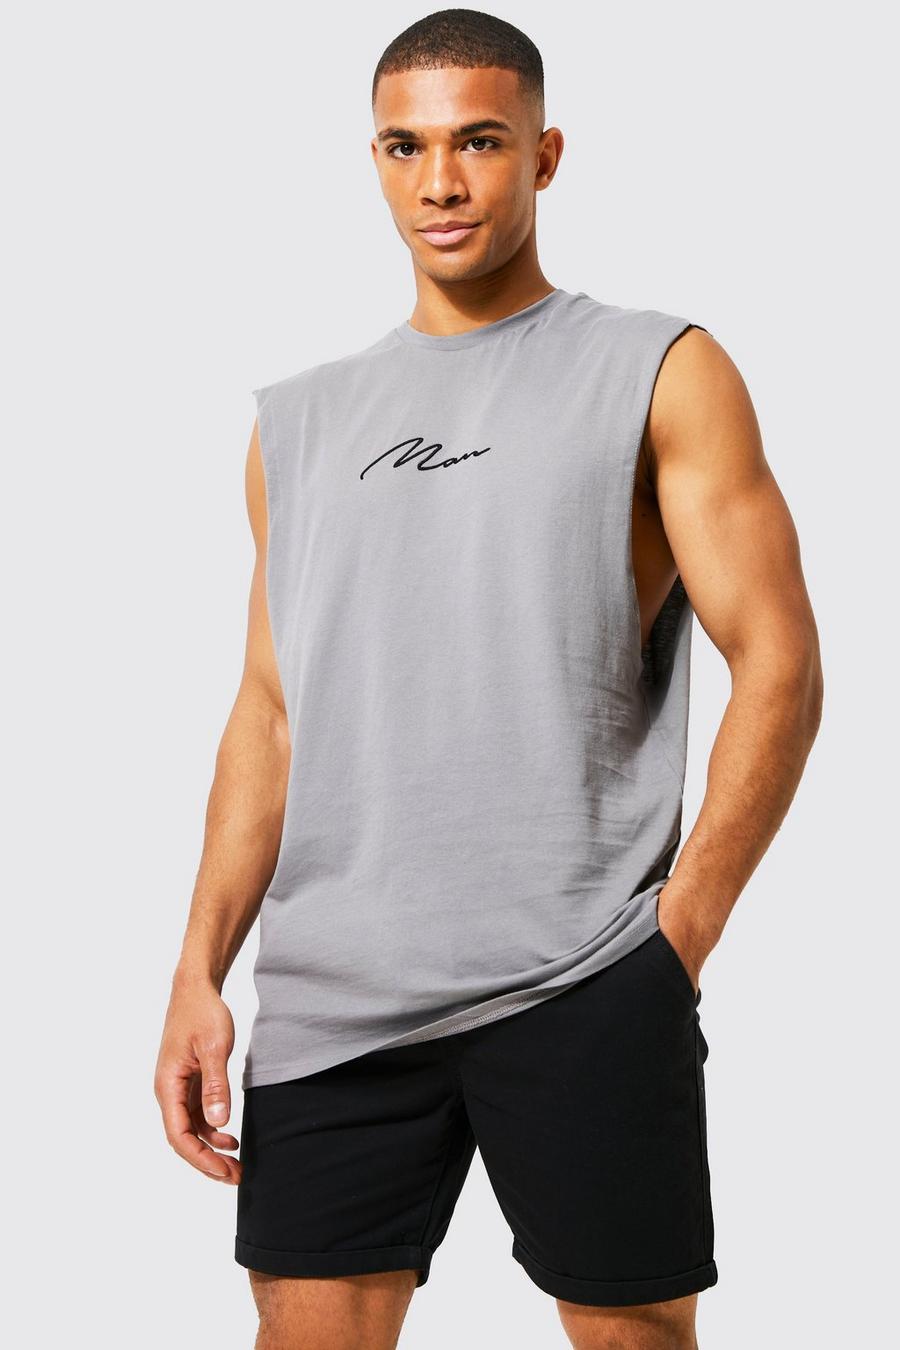 Men's Fitness Sleeveless Vest With Extreme Dropped Armhole Crew Neck  Regular fit Shirts Tank Tops